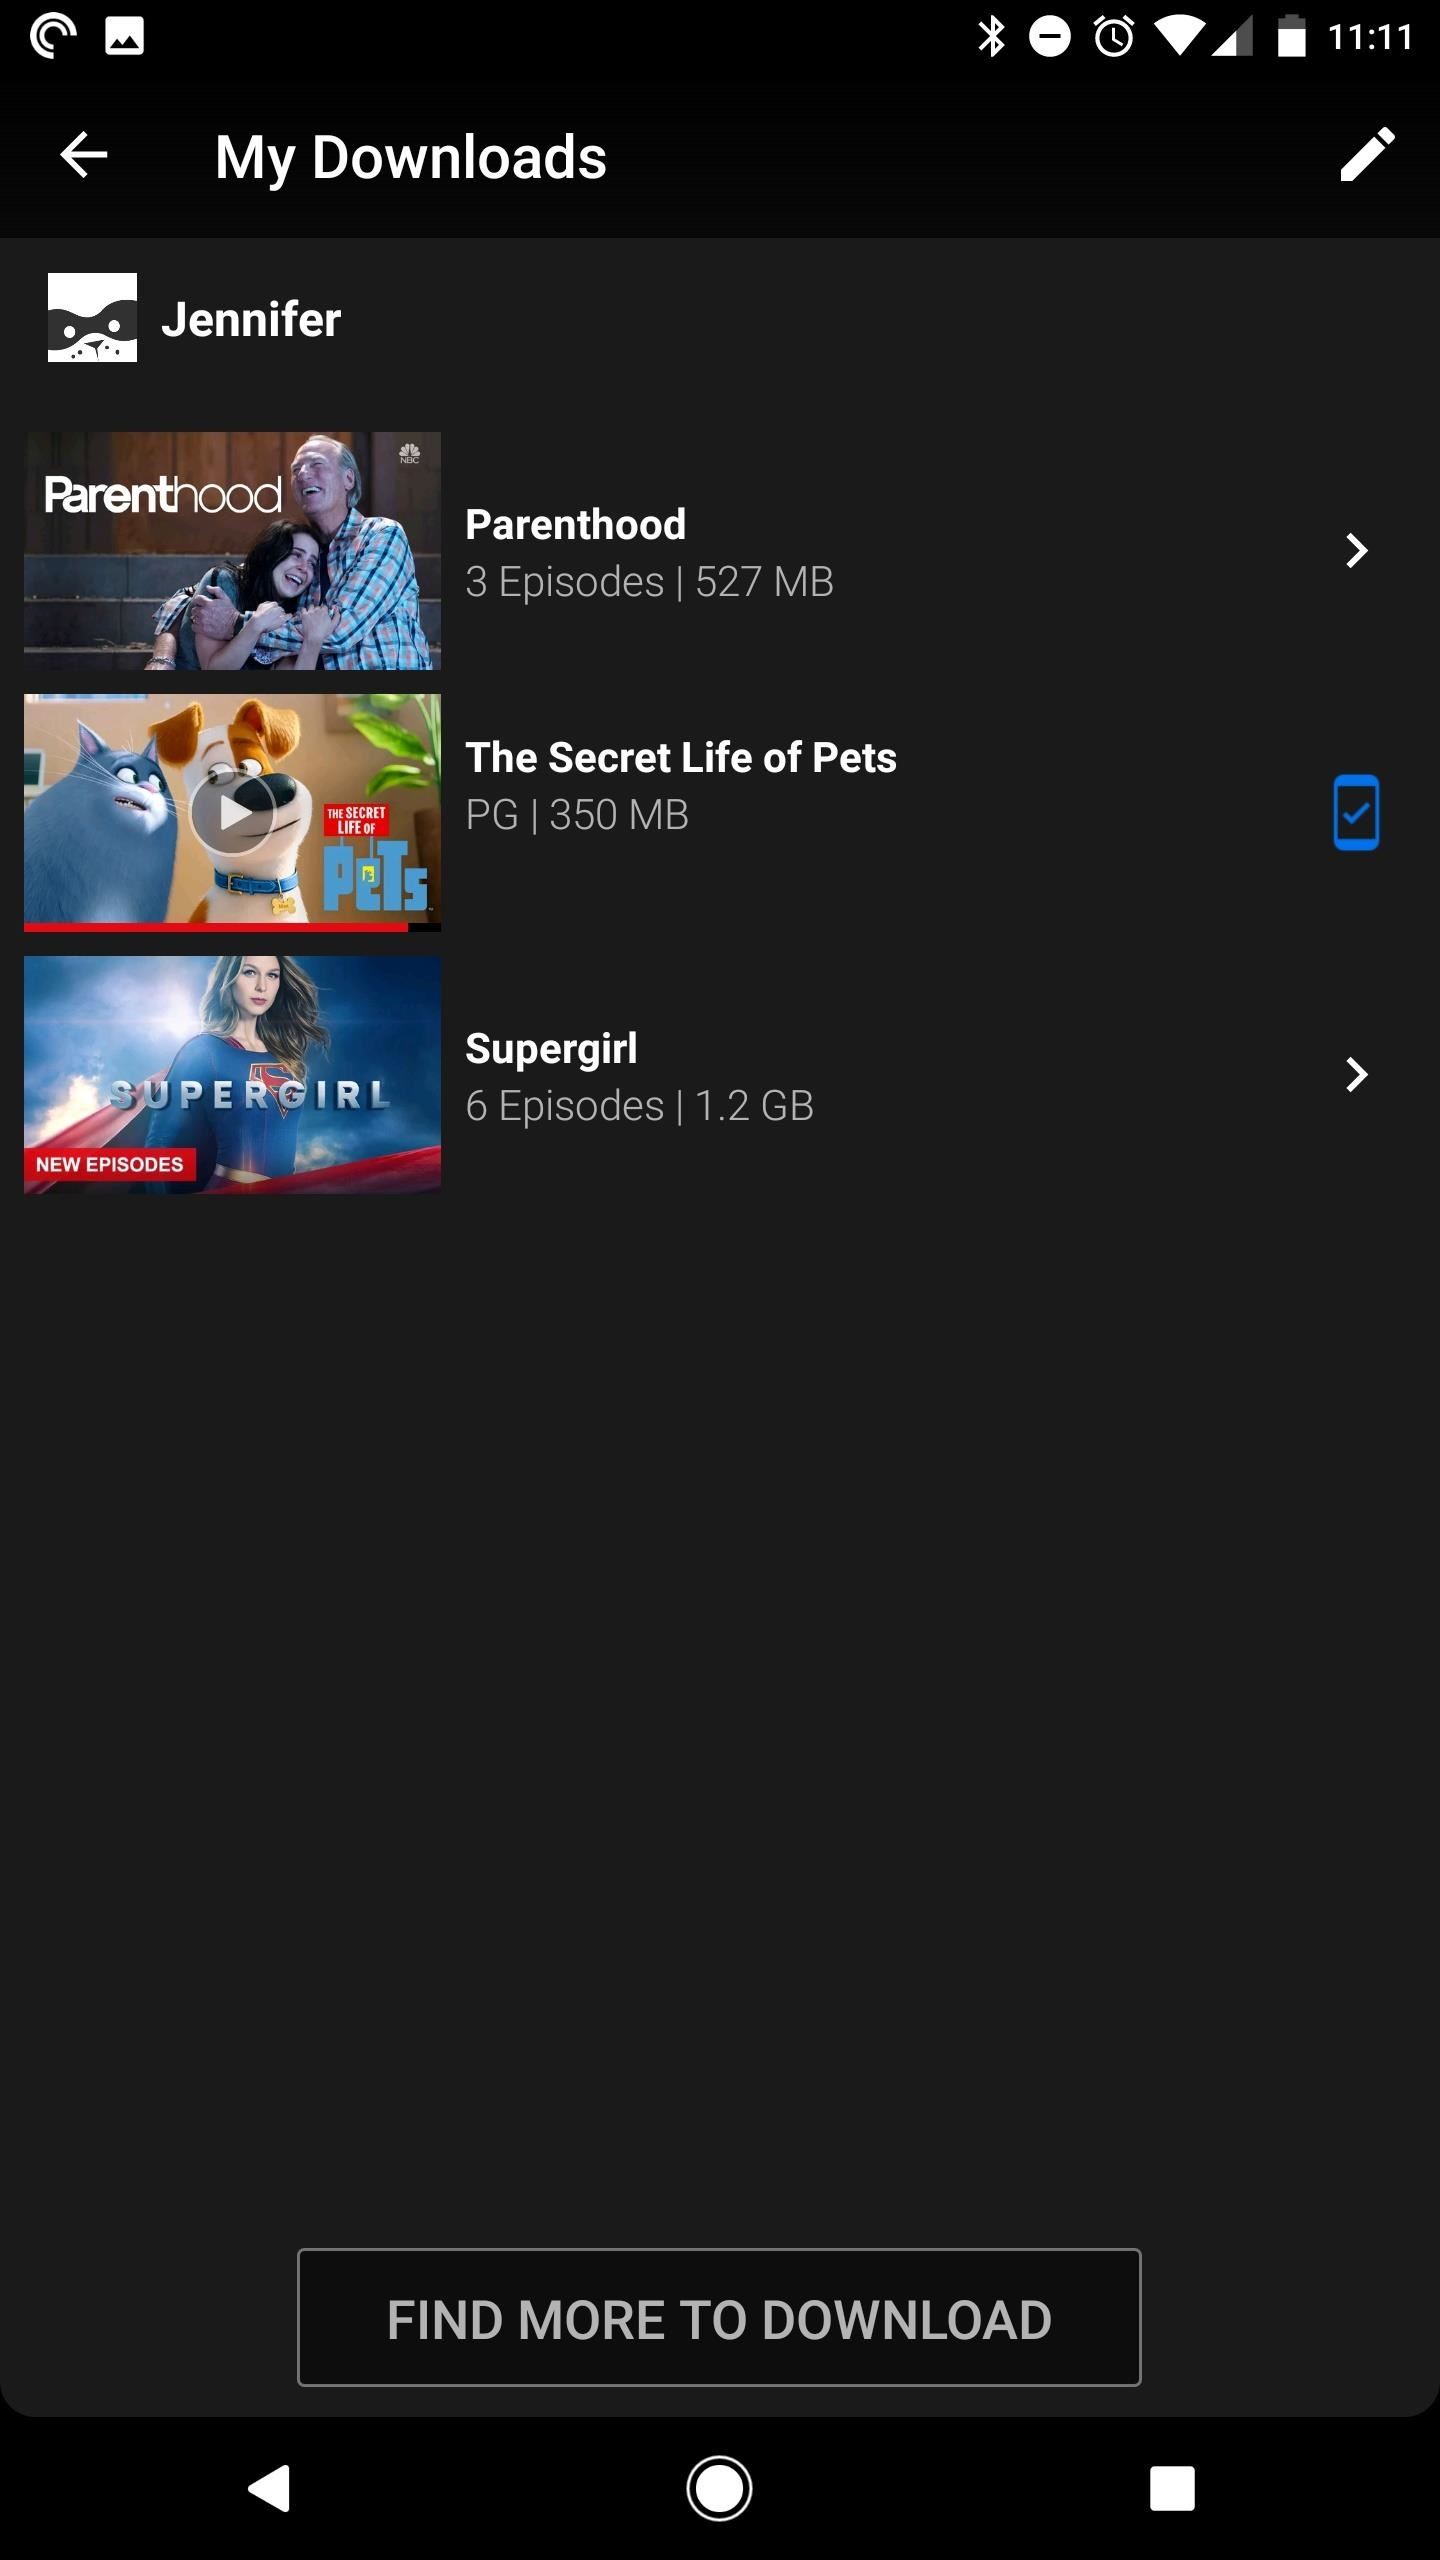 PSA: Netflix Limits How Many Times You Can Download a Single Movie or Episode